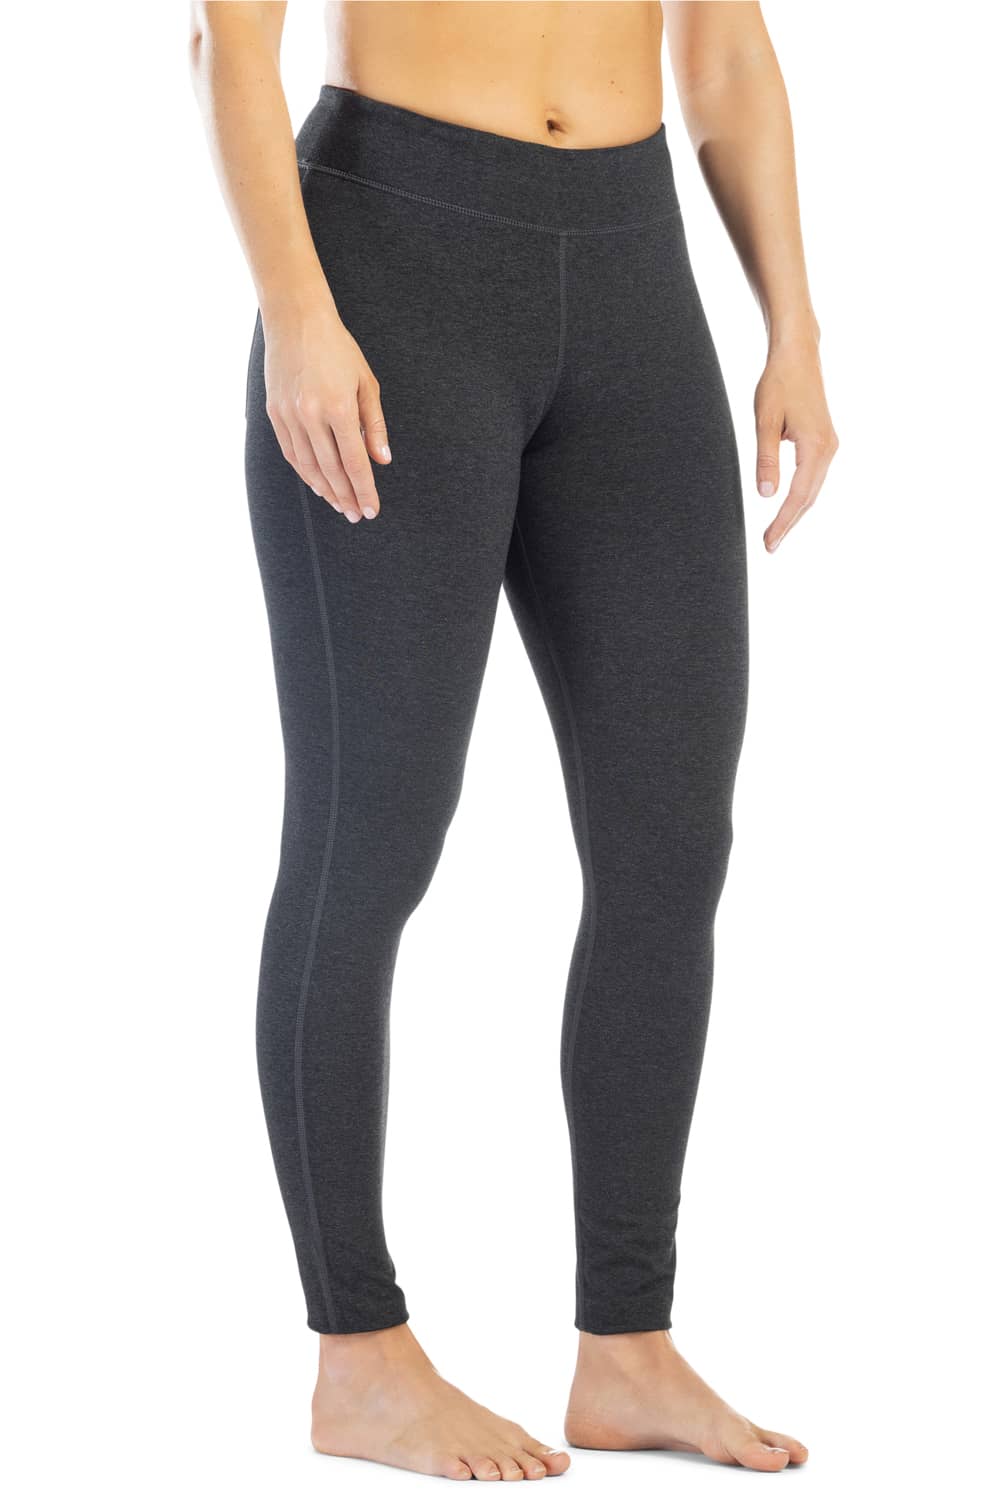 Women's Athleisure, Yoga Leggings with Back Pockets